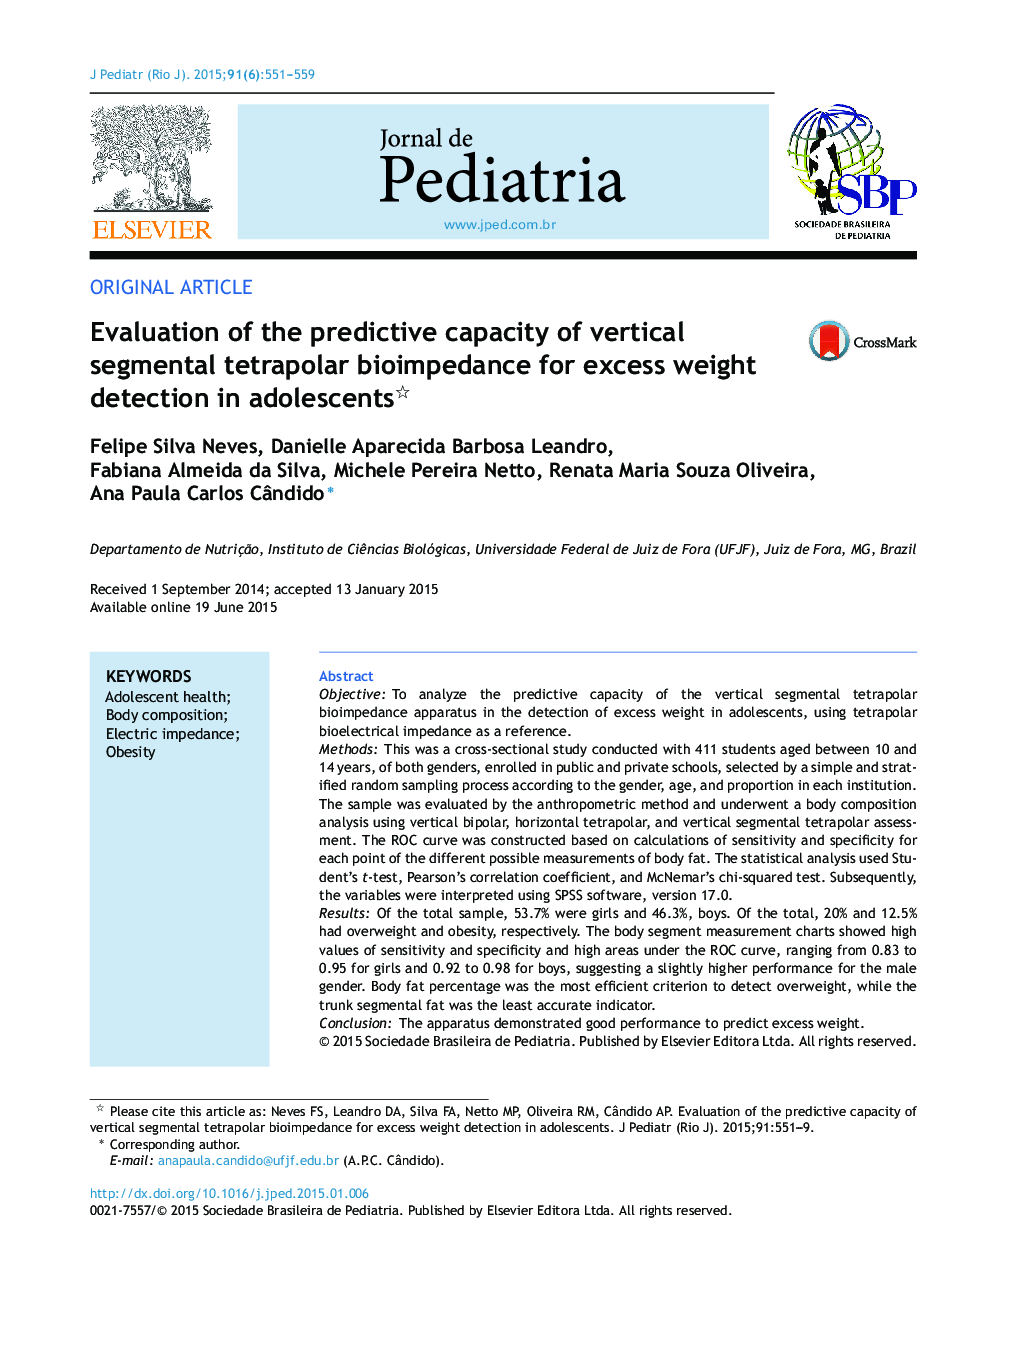 Evaluation of the predictive capacity of vertical segmental tetrapolar bioimpedance for excess weight detection in adolescents 